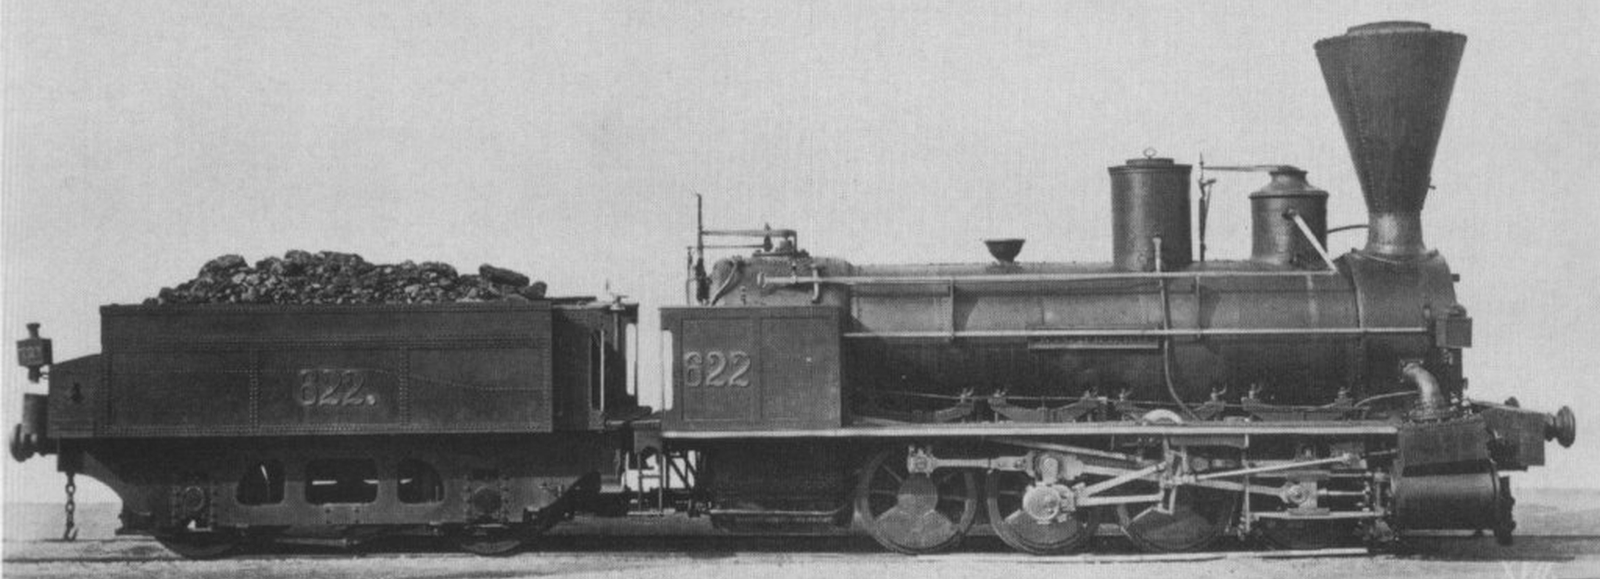 No. 622 after conversion to a tender locomotive